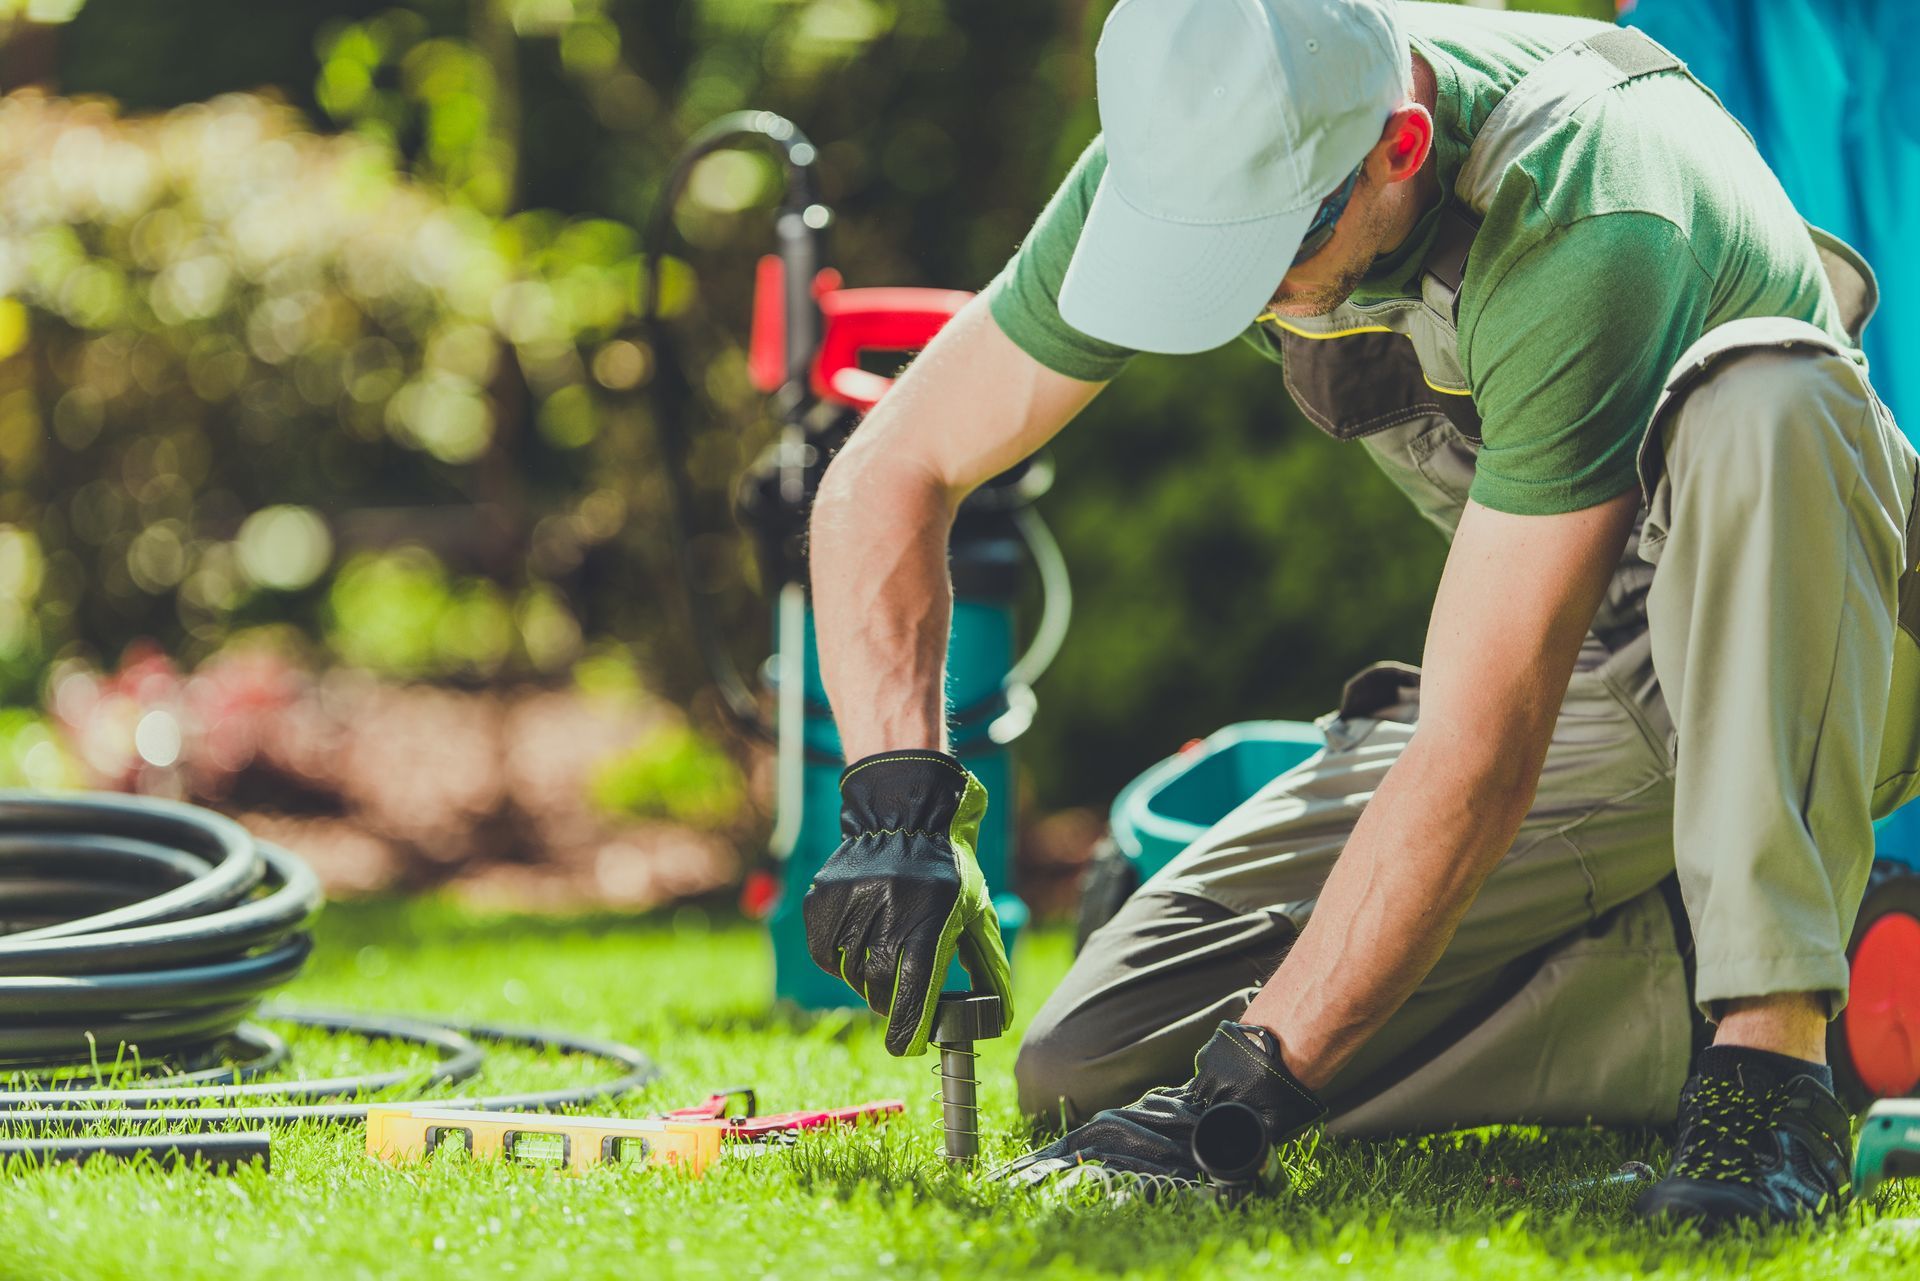 a man is kneeling on the grass installing sprinkler system on a lawn